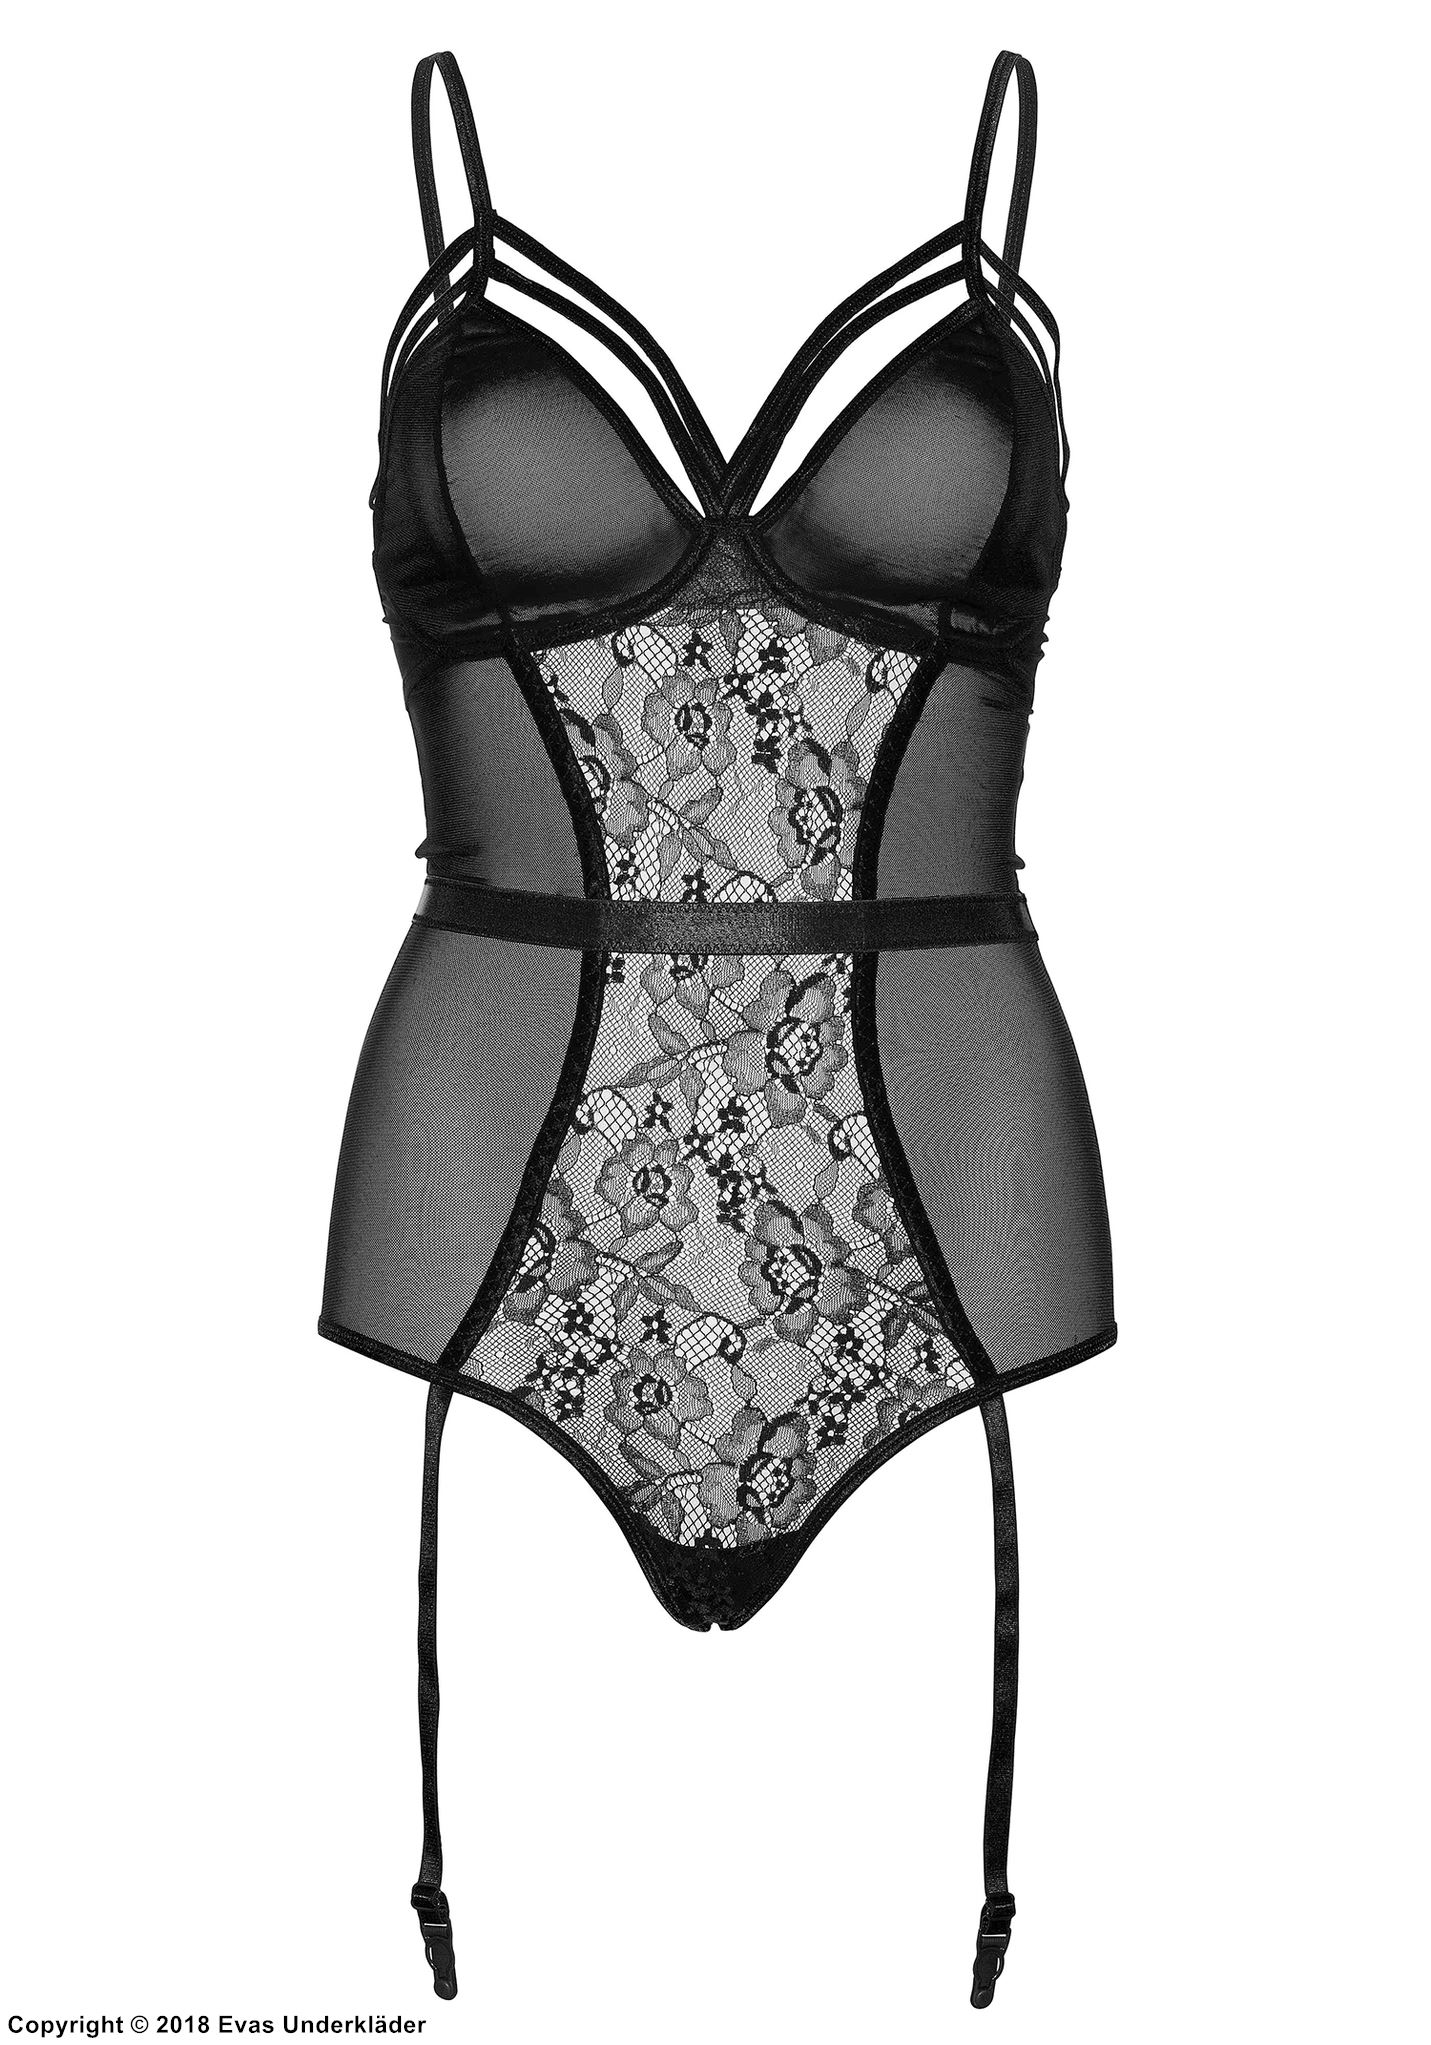 Sexy teddy, mesh, straps over bust, lace inlay